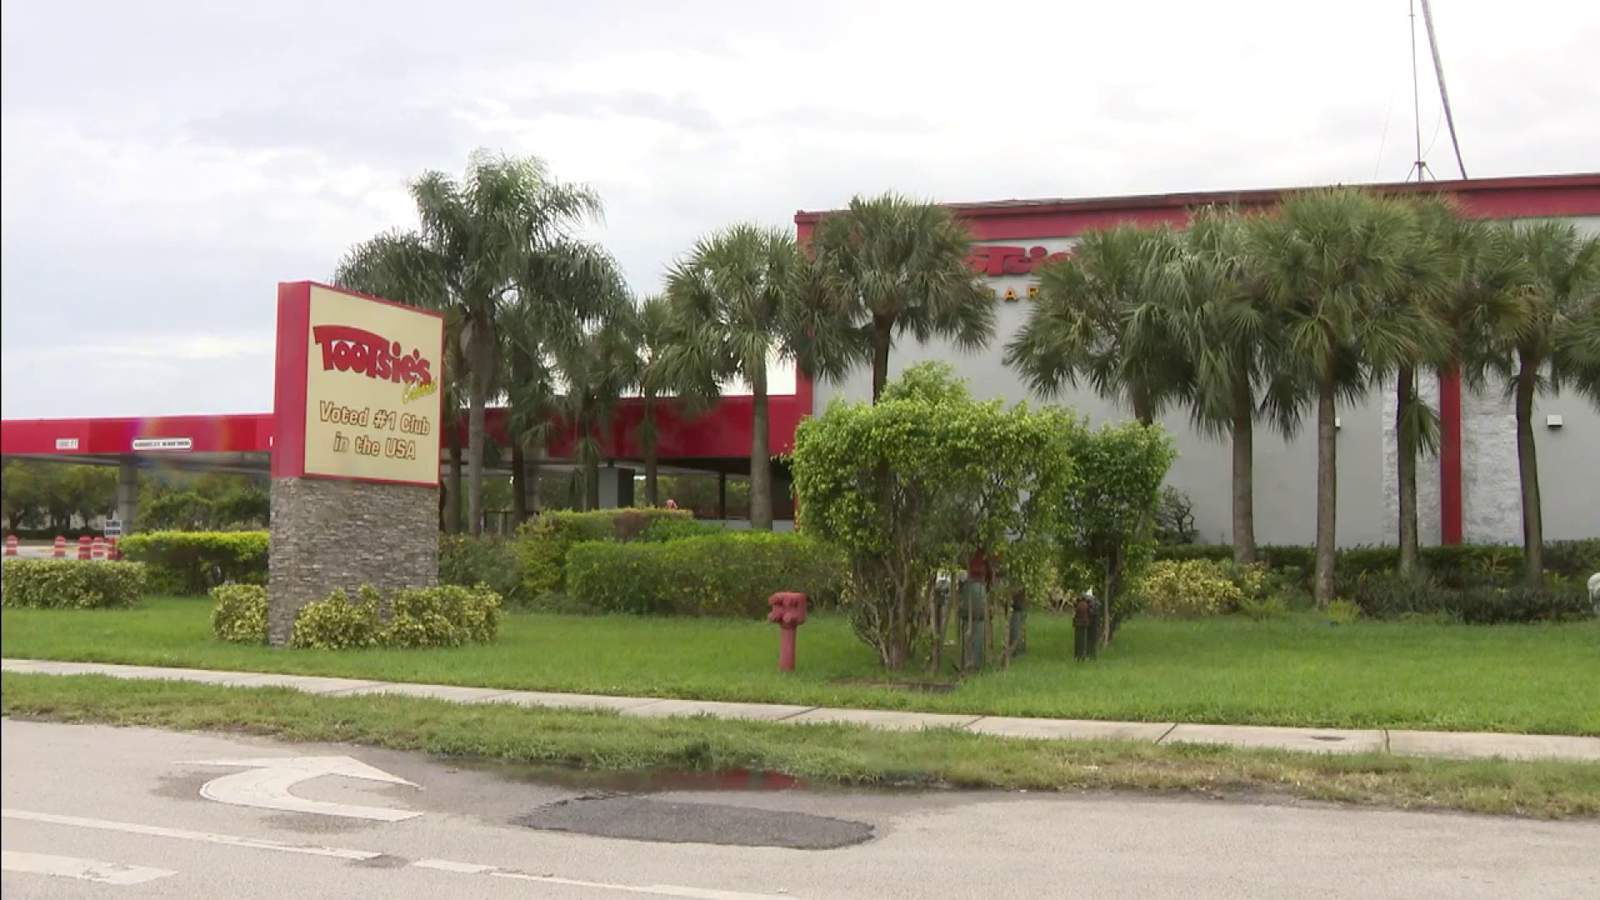 Curfew back on: Strip club’s victory over Miami-Dade County could be short-lived